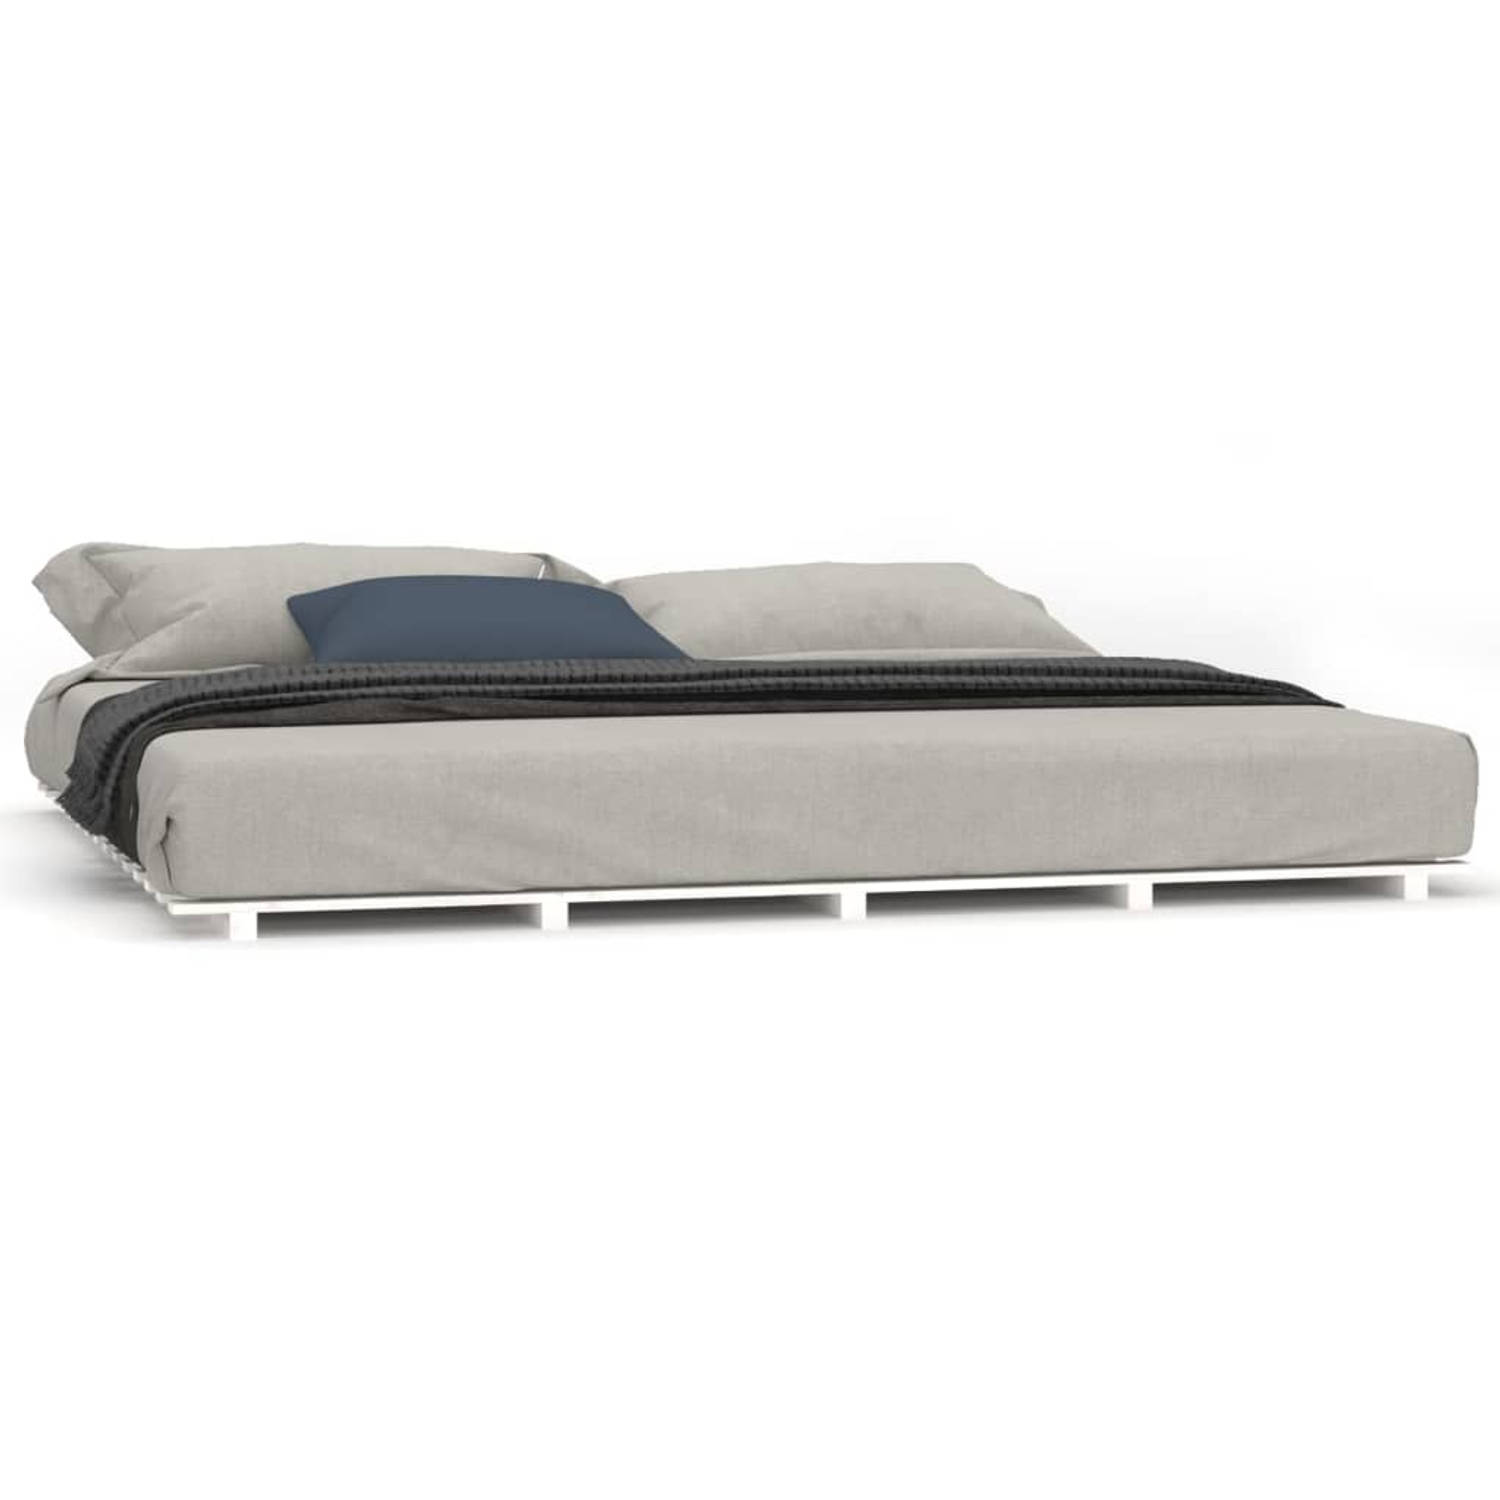 The Living Store Bedframe massief grenenhout wit 160x200 cm - Bed